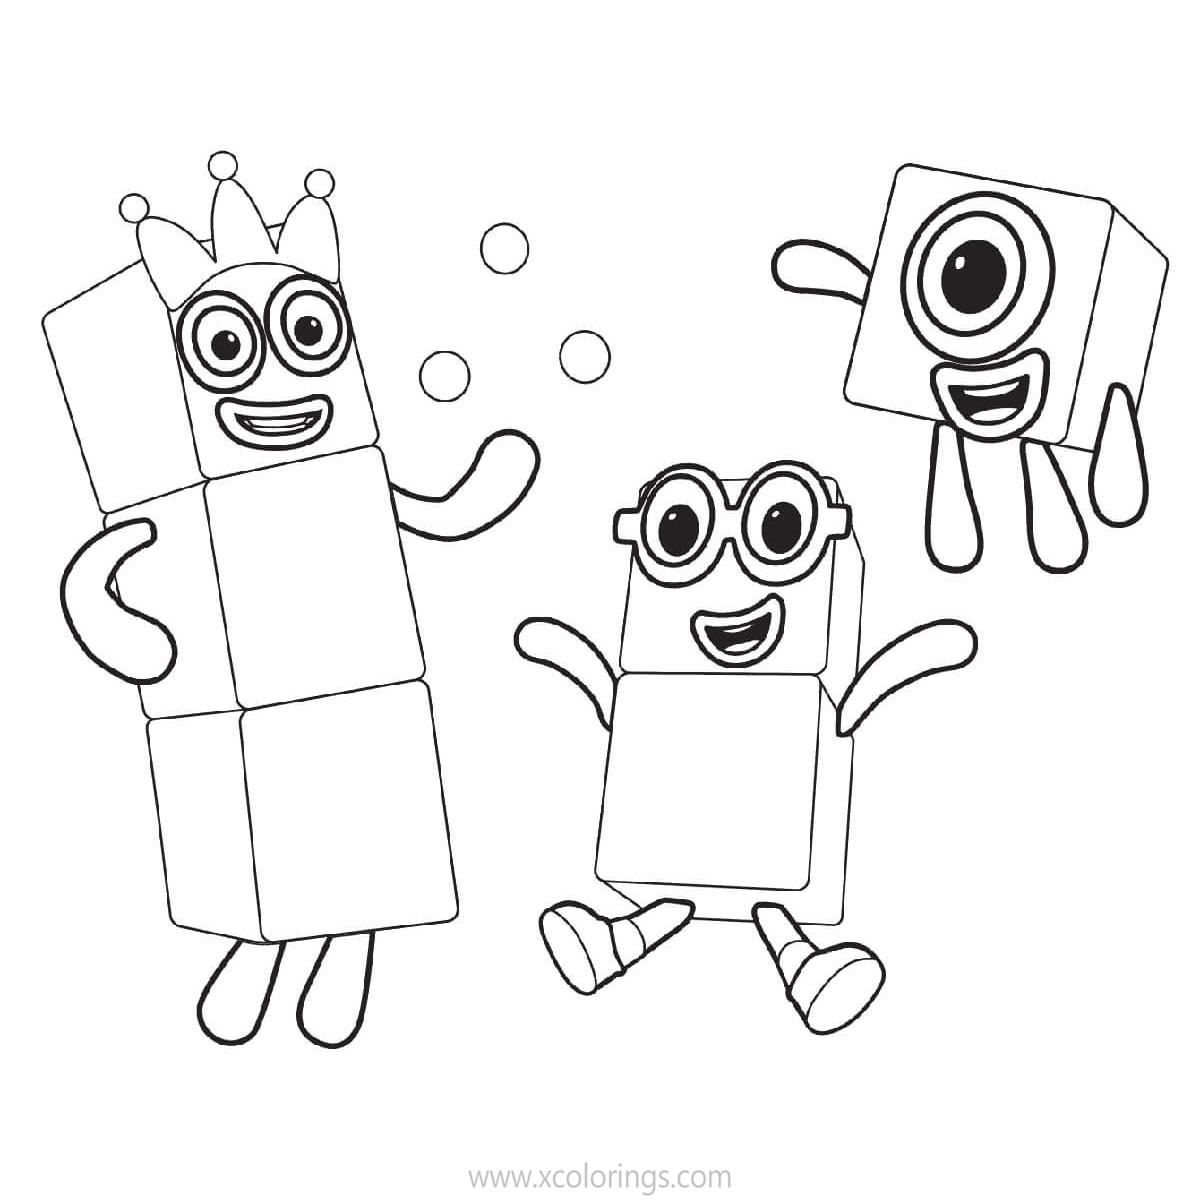 26-best-ideas-for-coloring-blocks-coloring-pages